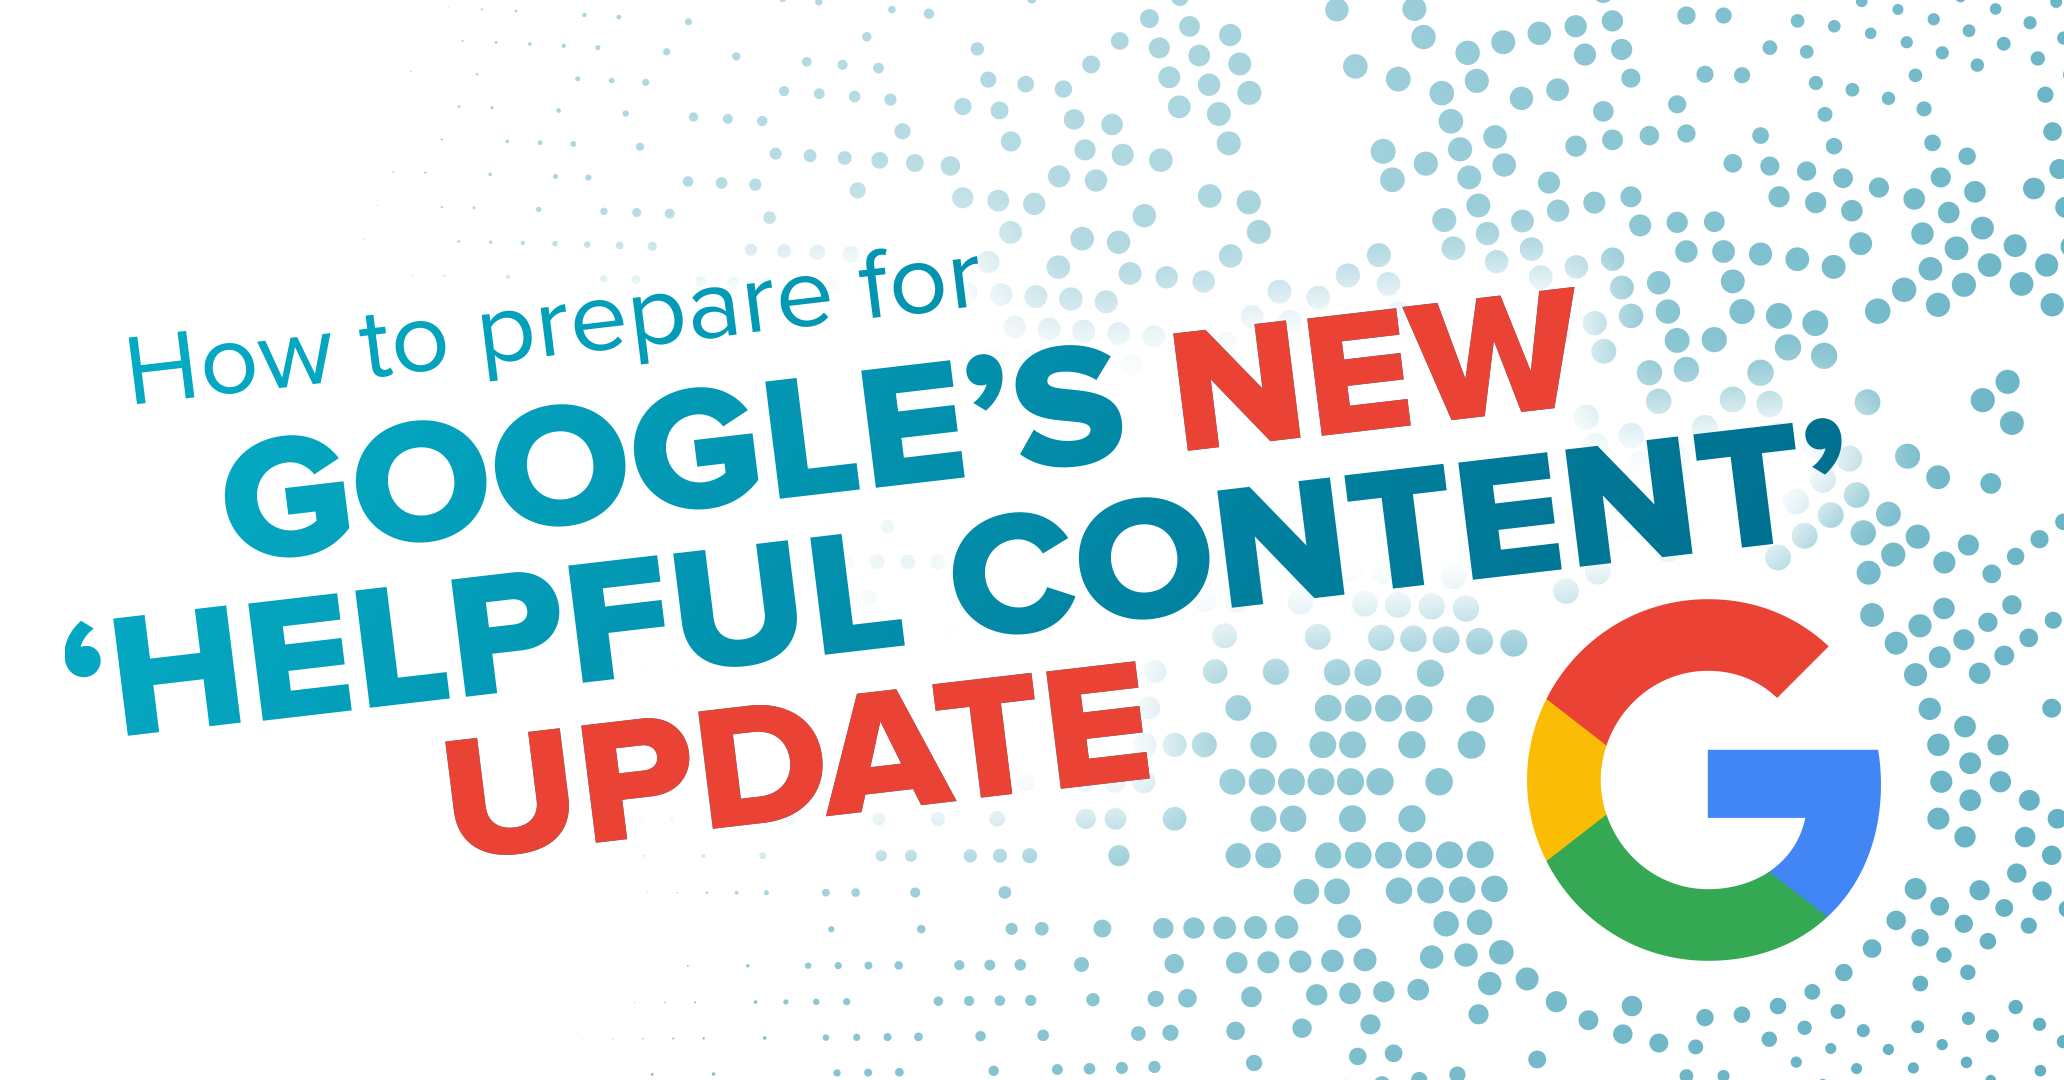 How to prepare for Google's new Helpful Content update